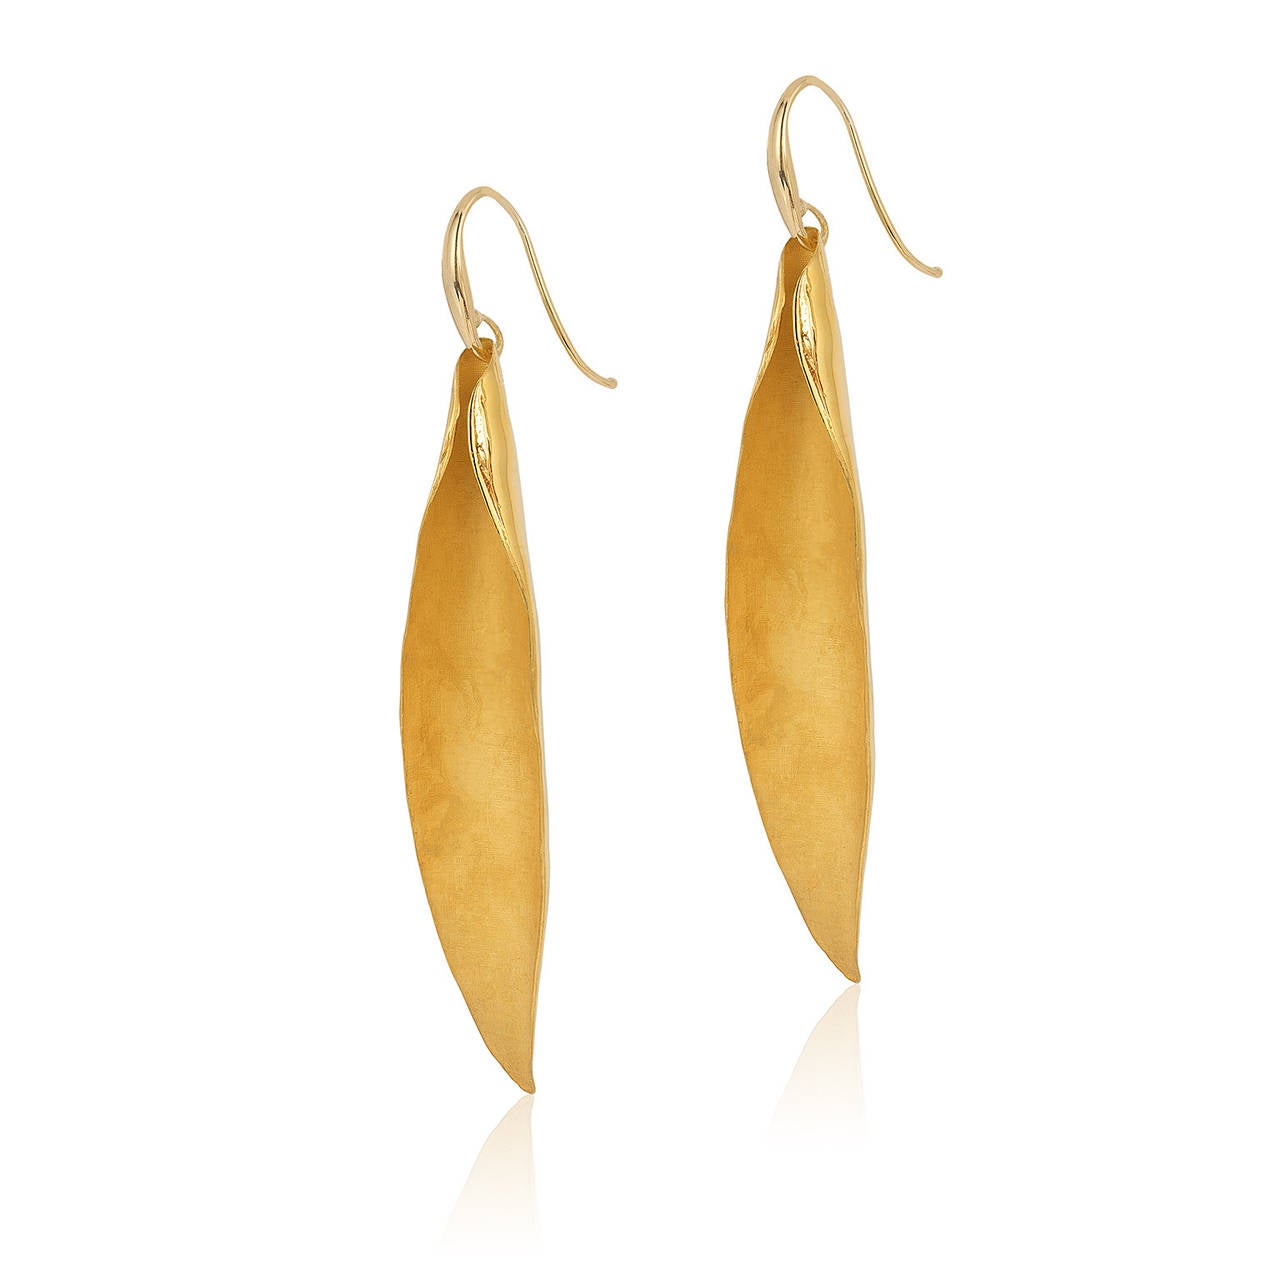 Exquisite Renato CIpullo 18kt  yellow gold earrings comprised of two sculptural leaf shape drops.

Each leaf has a polished exterior and soft matte interior finish.